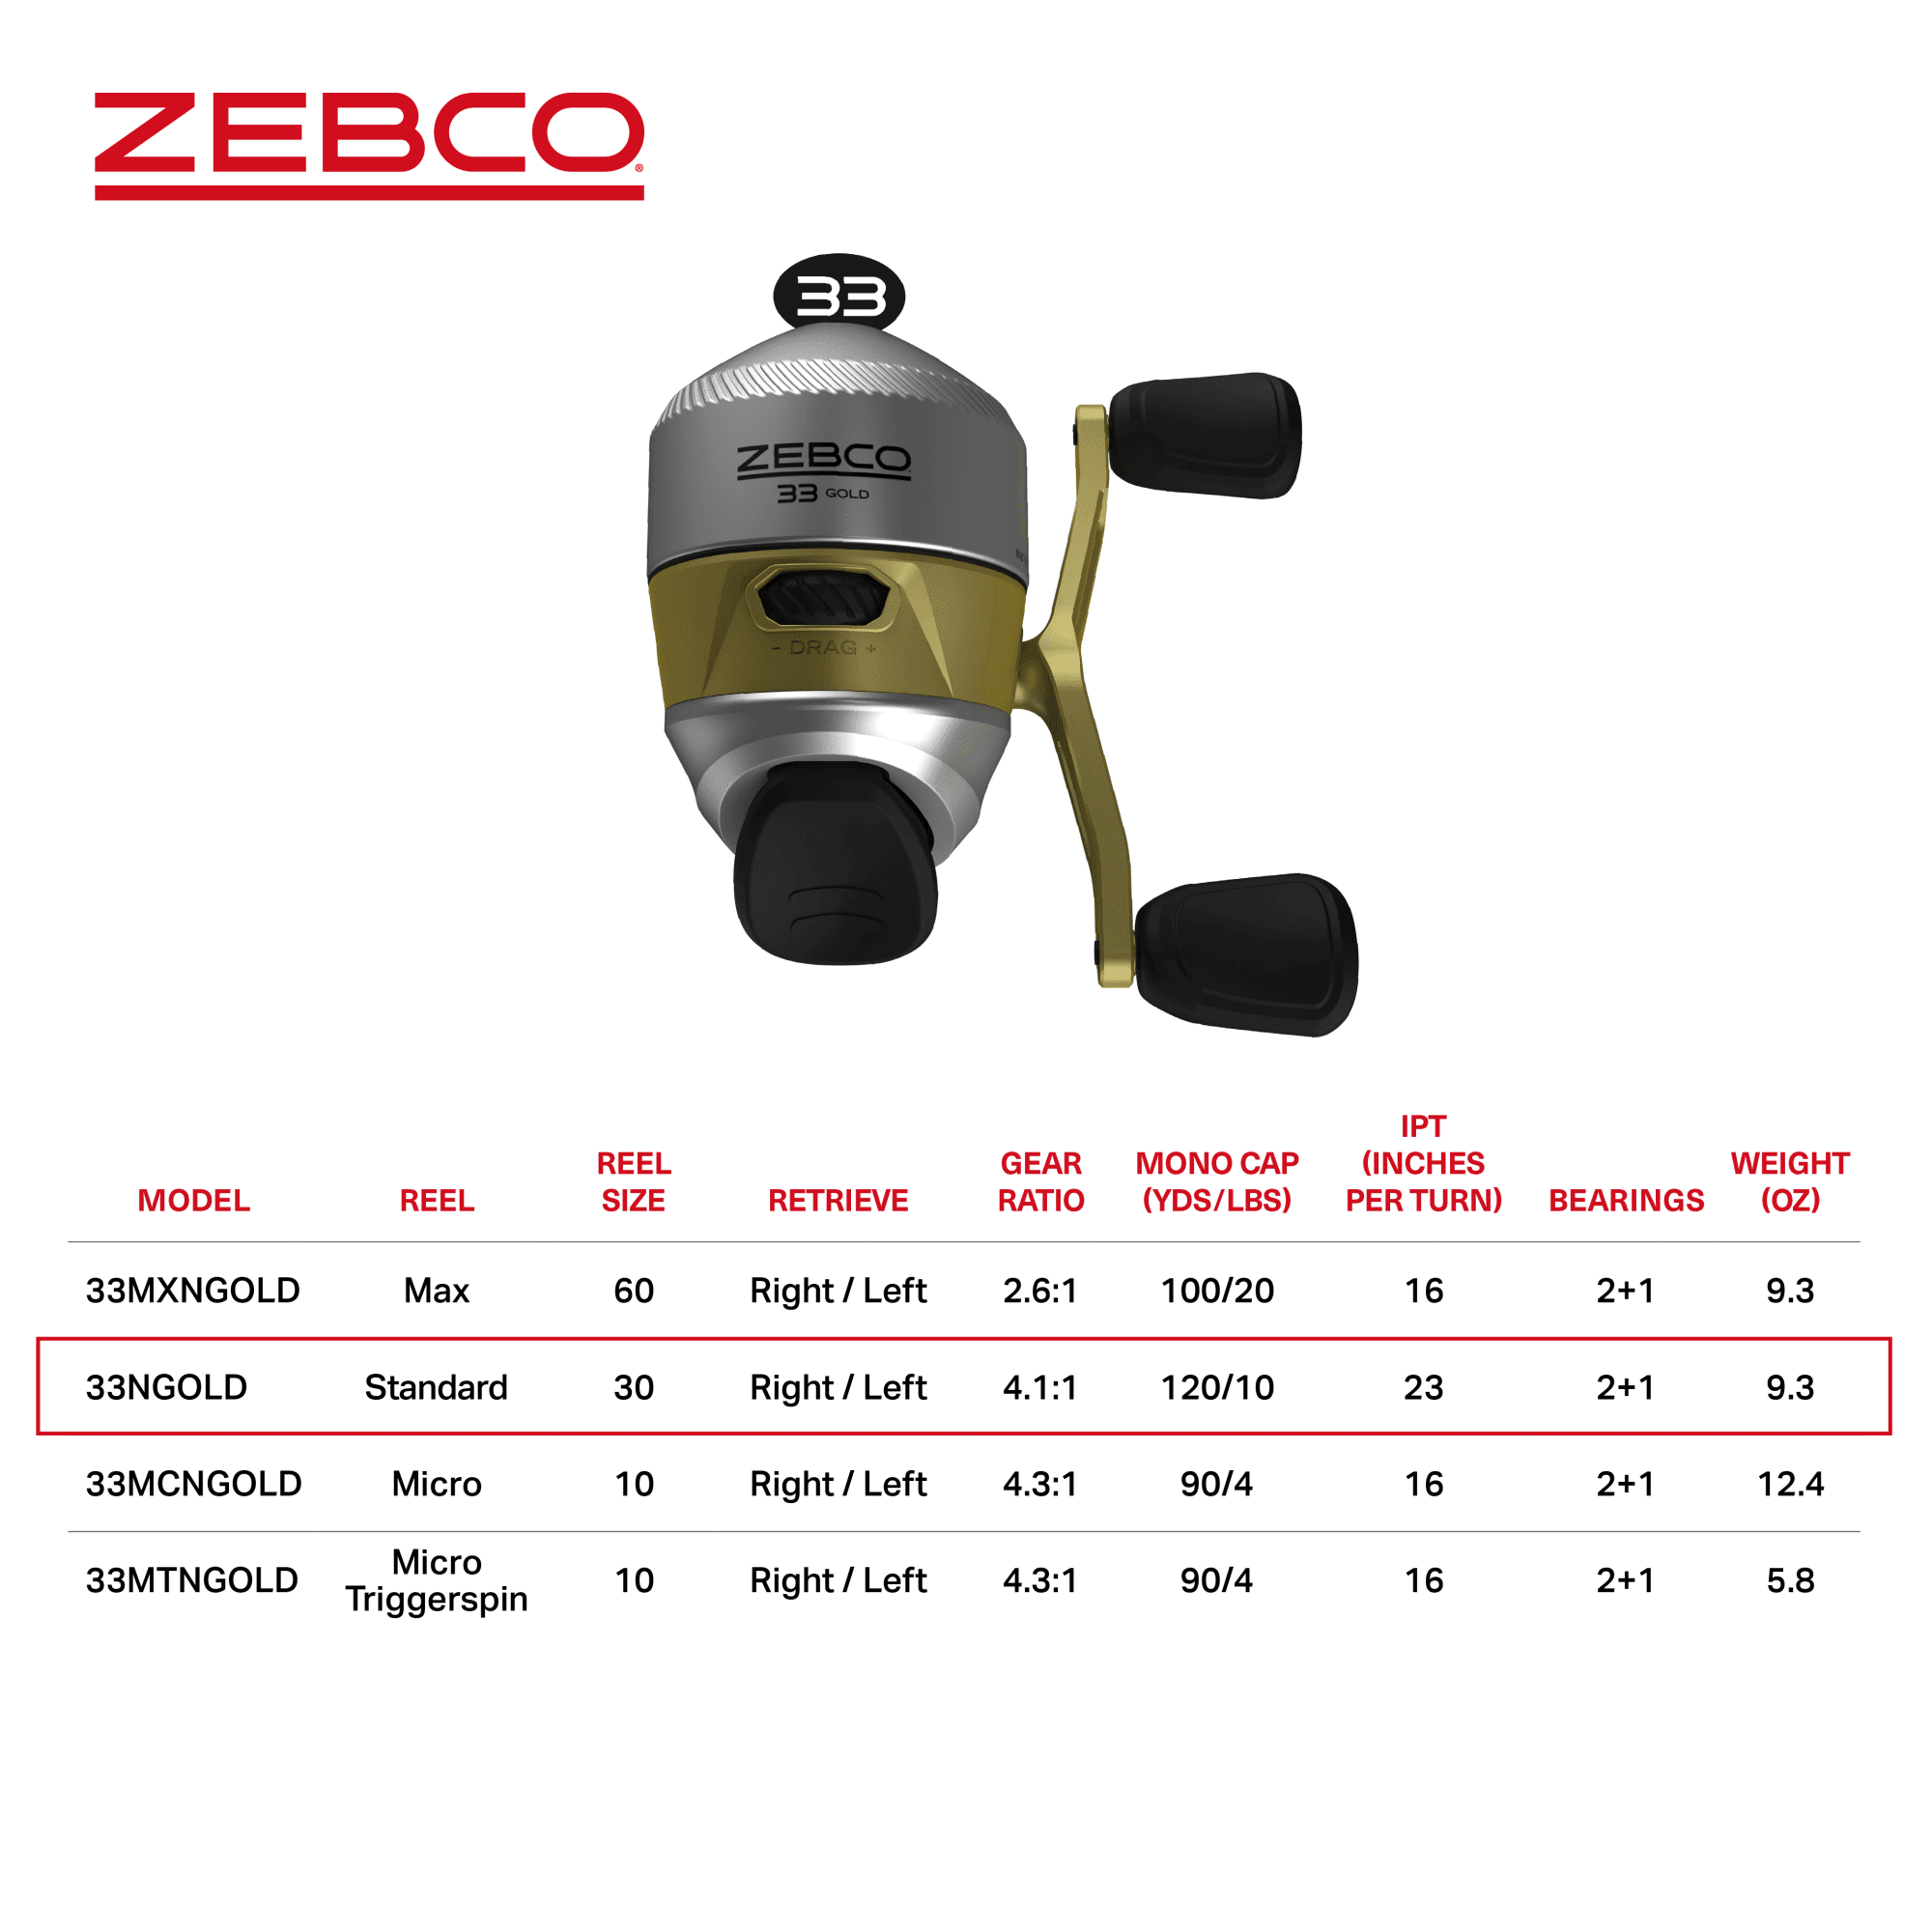 Zebco 33 Gold Spincast Fishing Reel, Size 30 Reel, Changeable Right- or  Left-Hand Retrieve, Durable All-Metal Gears, Pre-Spooled with 10-Pound Zebco  Cajun Fishing Line, Silver/Gold 